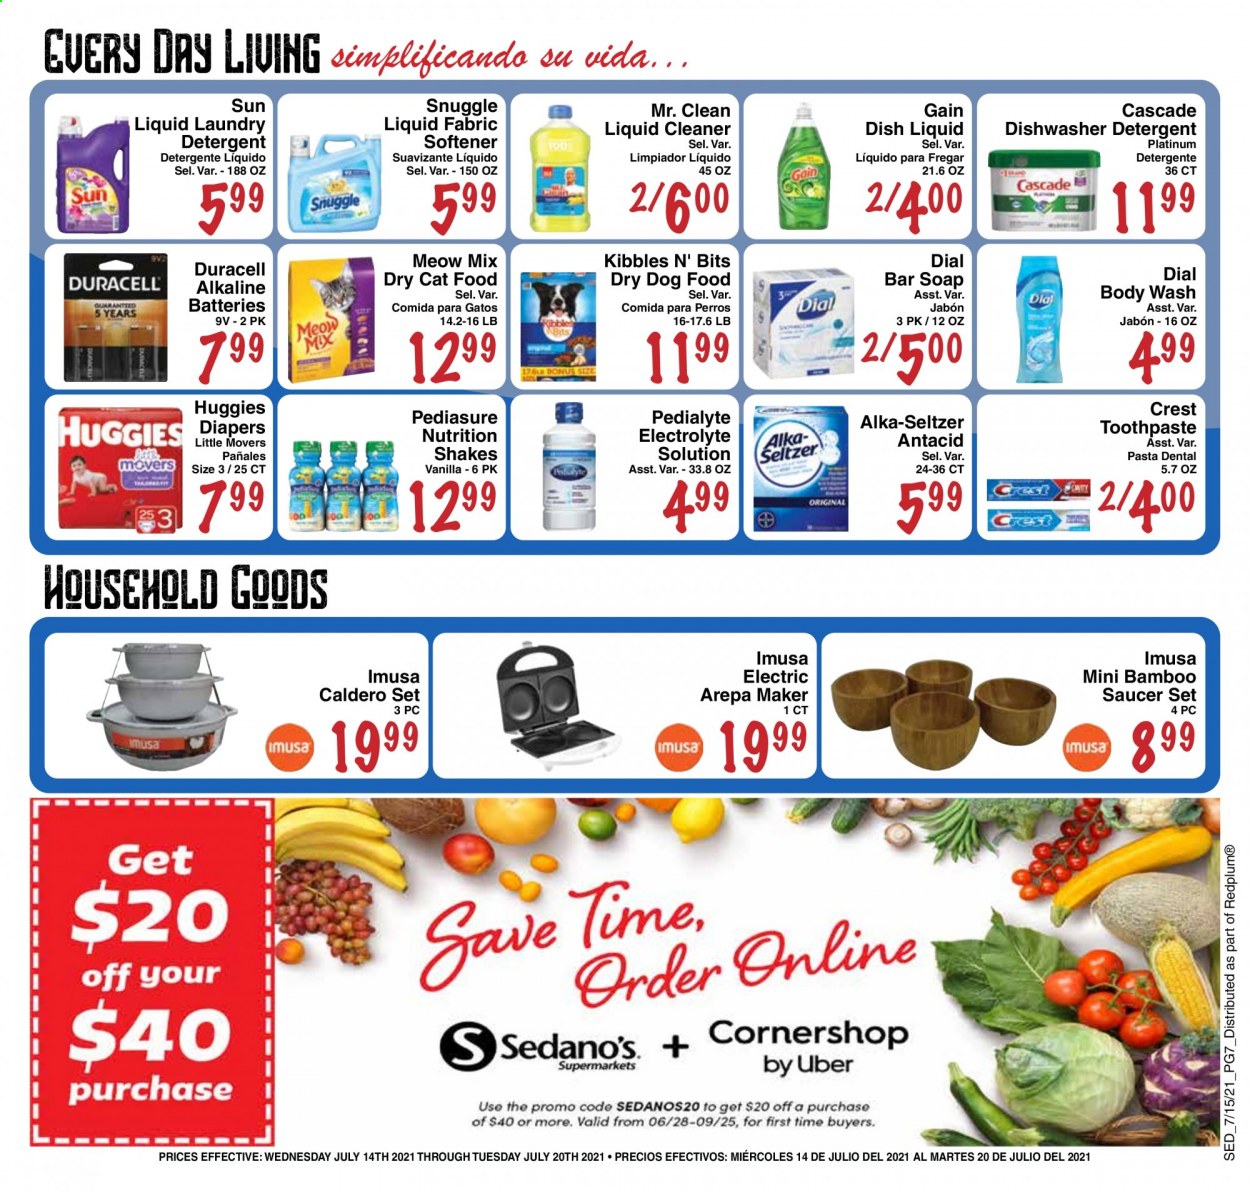 thumbnail - Sedano's Flyer - 07/14/2021 - 07/20/2021 - Sales products - tortillas, donut, corn, peas, peppers, red peppers, tuna, macaroni & cheese, pasta sauce, sauce, Kraft®, milk, condensed milk, wafers, Nutella, chocolate, crackers, Kellogg's, bread sticks, potato chips, chips, Lay’s, popcorn, Ruffles, croutons, light tuna, Goya, cereals, rice, toor dal, dry beans, long grain rice, salsa, extra virgin olive oil, wine vinegar, olive oil, oil, grape seed oil, hazelnut spread, powder drink, instant coffee, Folgers, ground coffee, coffee capsules, K-Cups, Nature's Own, Go!. Page 7.